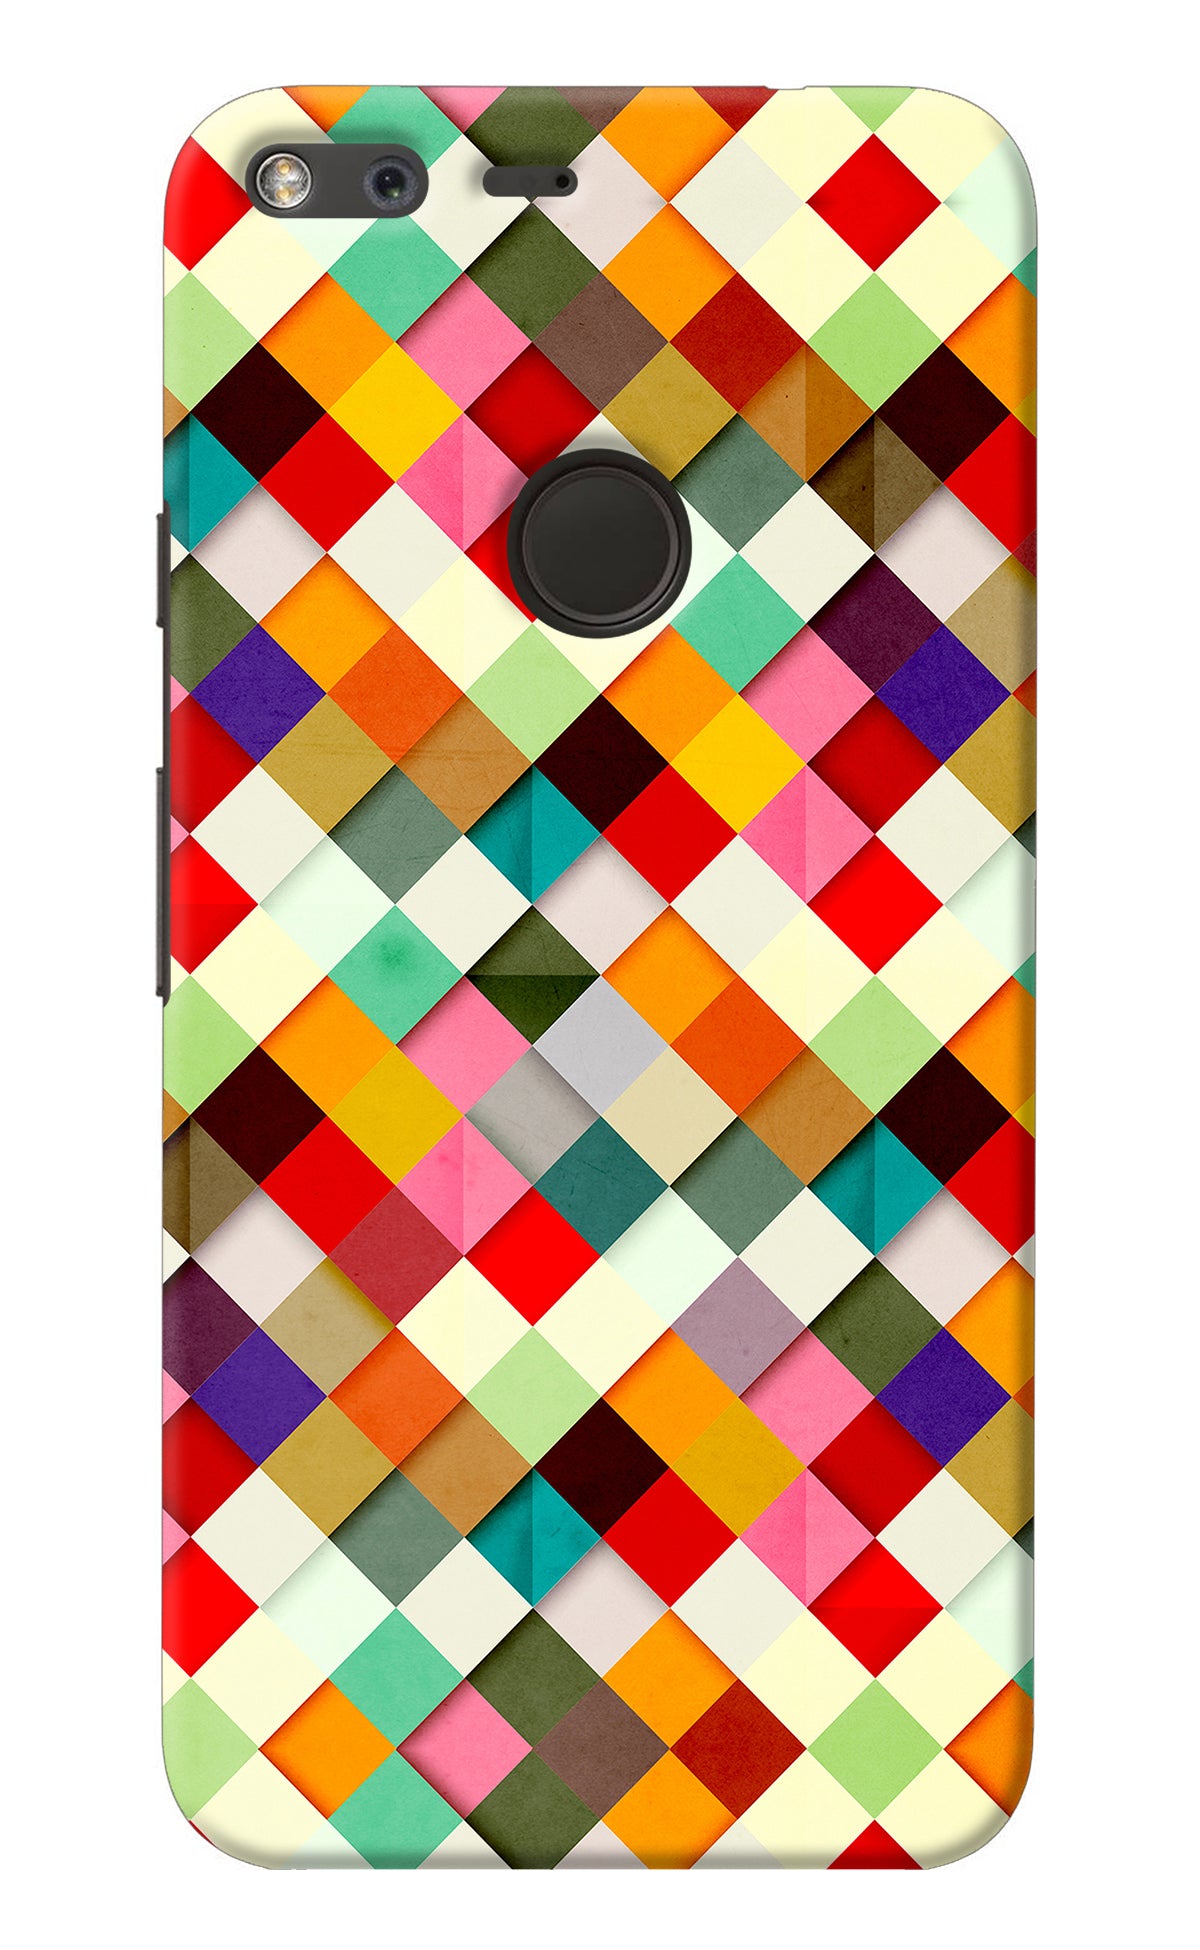 Geometric Abstract Colorful Google Pixel XL Back Cover